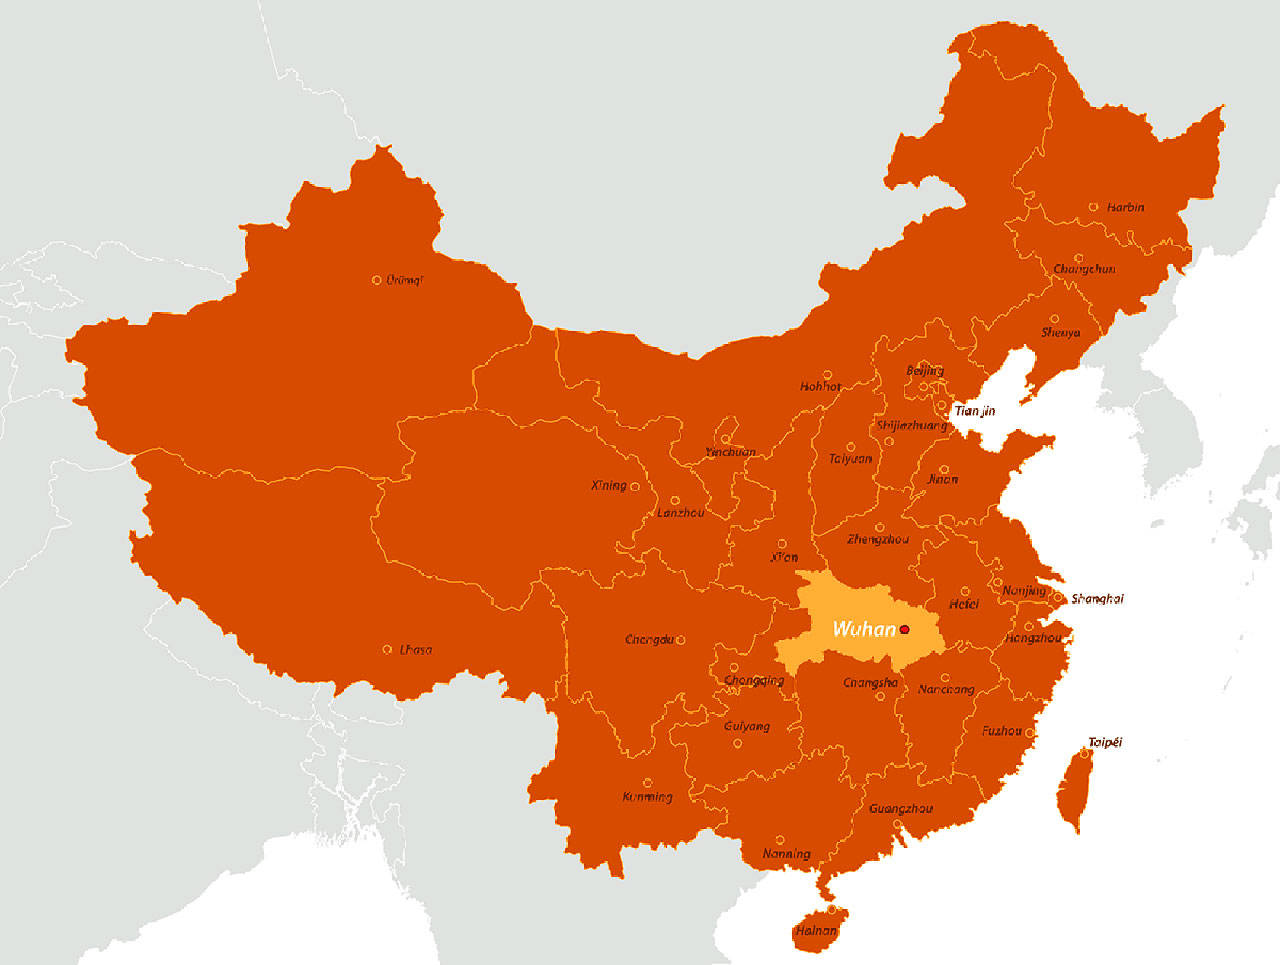 The new coronavirus was first identified in Wuhan, Hubei, Province in China. There have been 300 confirmed cases inside and outside the province. Image courtesy CDC